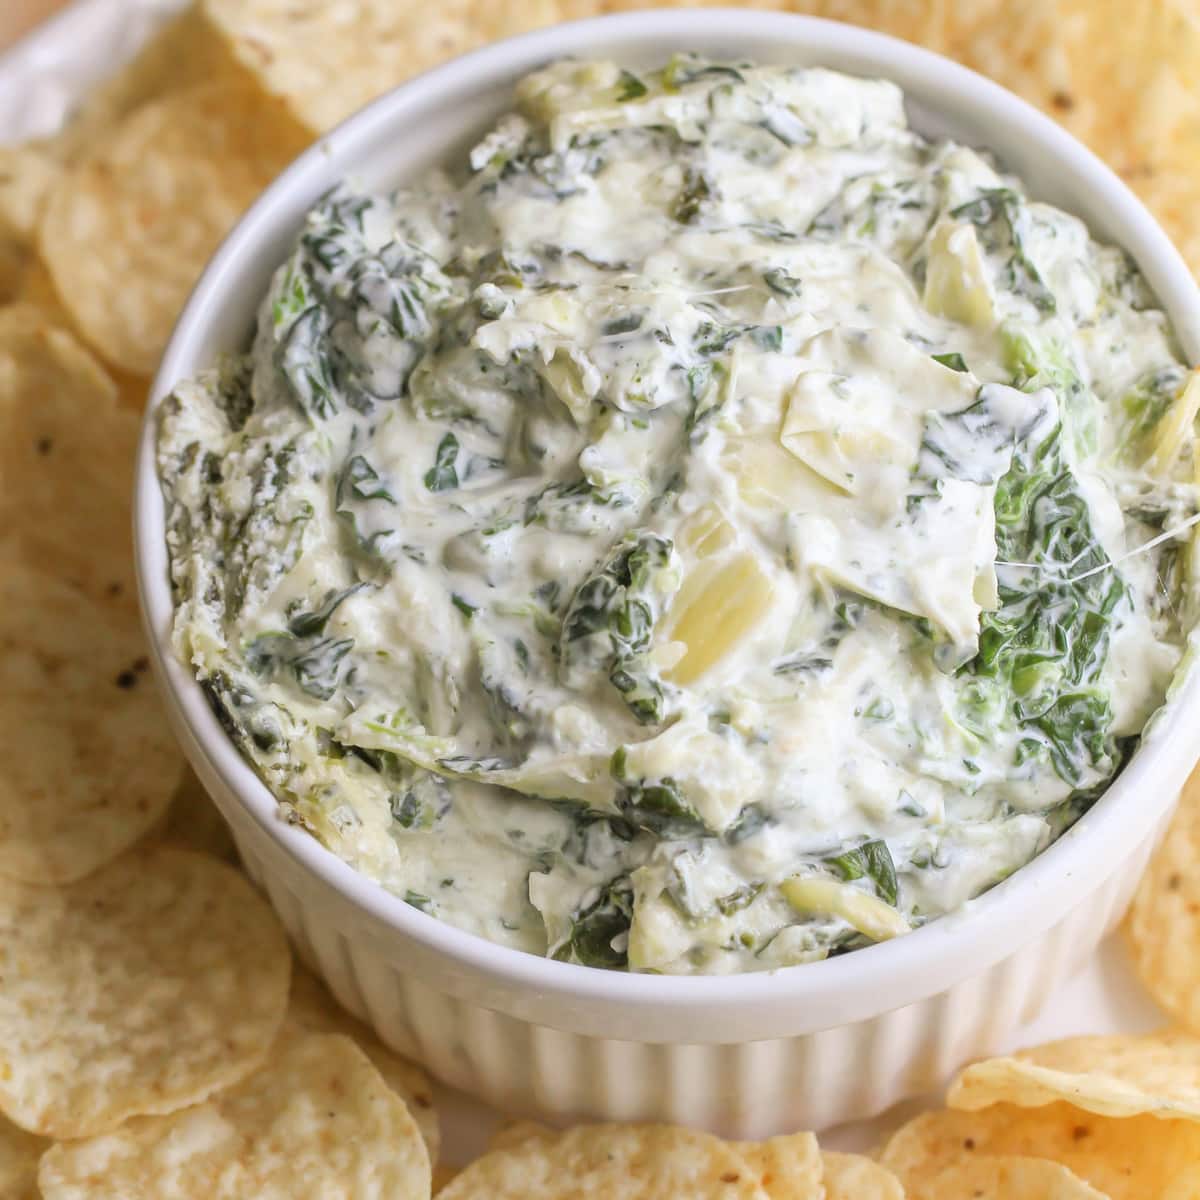 Christmas dinner ideas - a bowl of spinach artichoke dip served with chips.